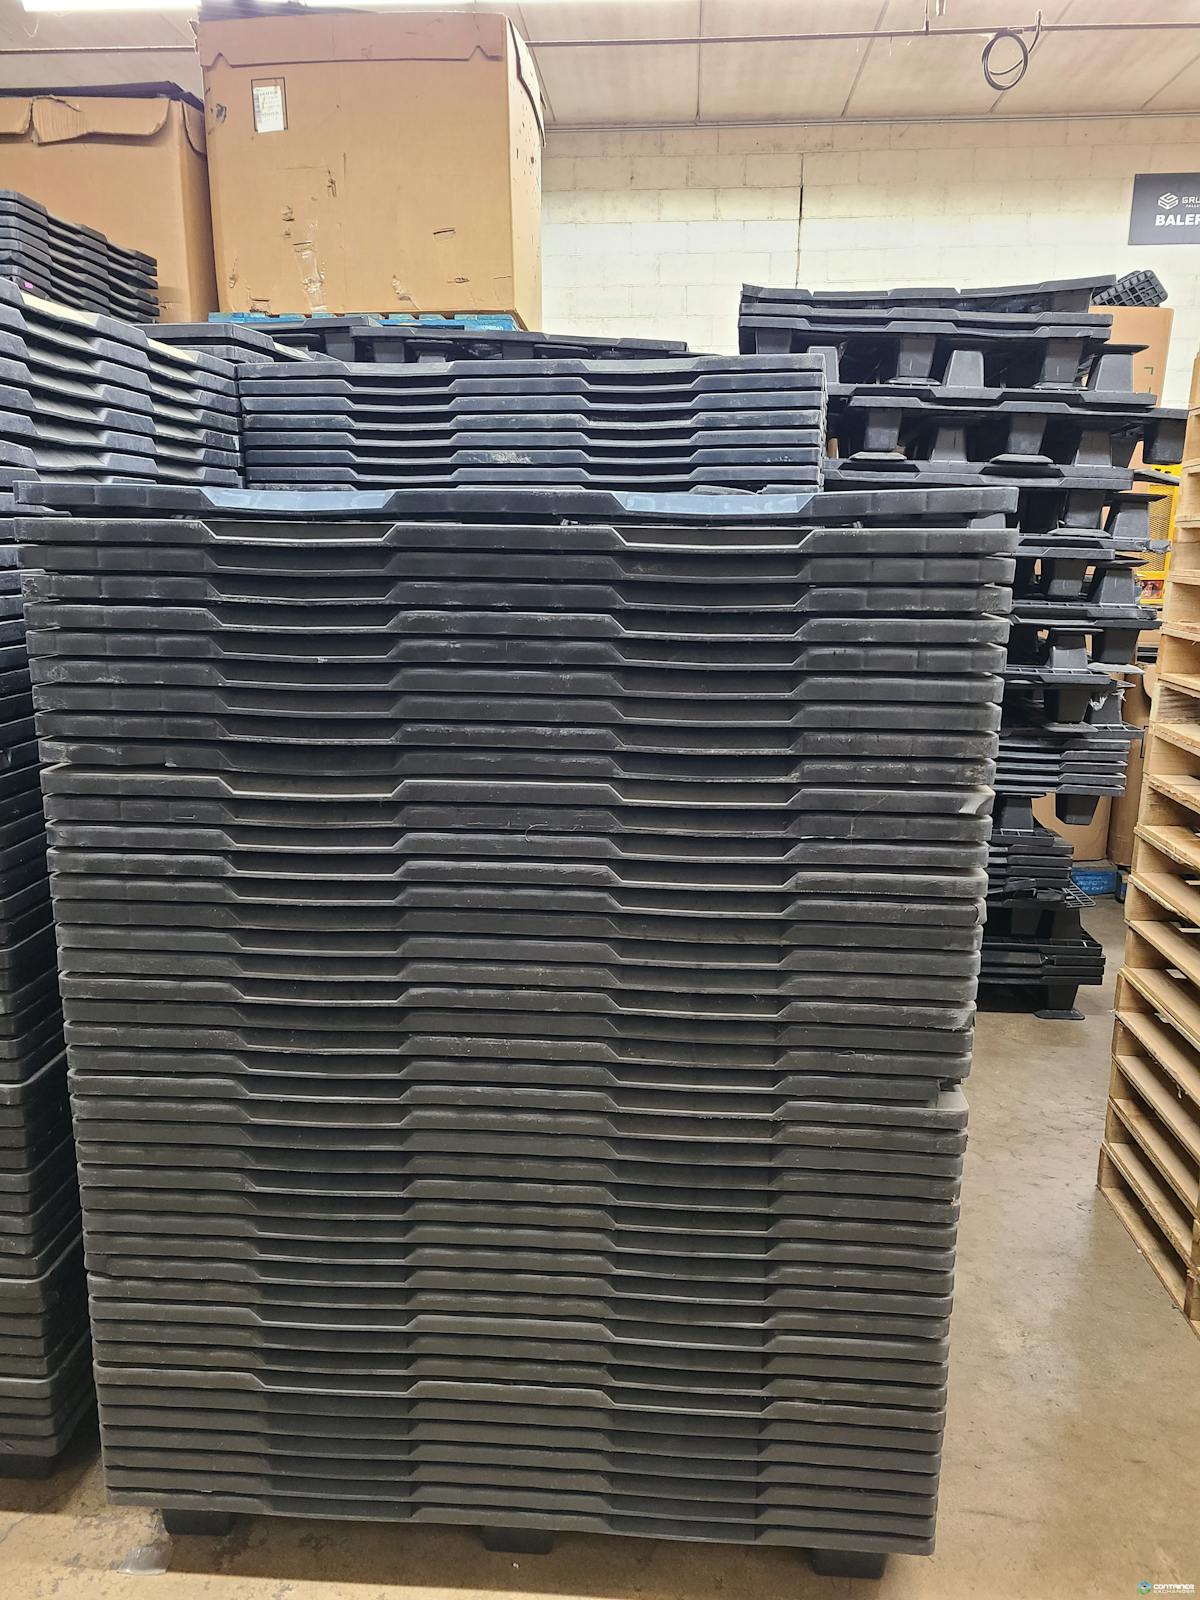 Plastic Pallets For Sale: Used 48x40 Nestable Plastic Pallets New York In Illinois - image  3